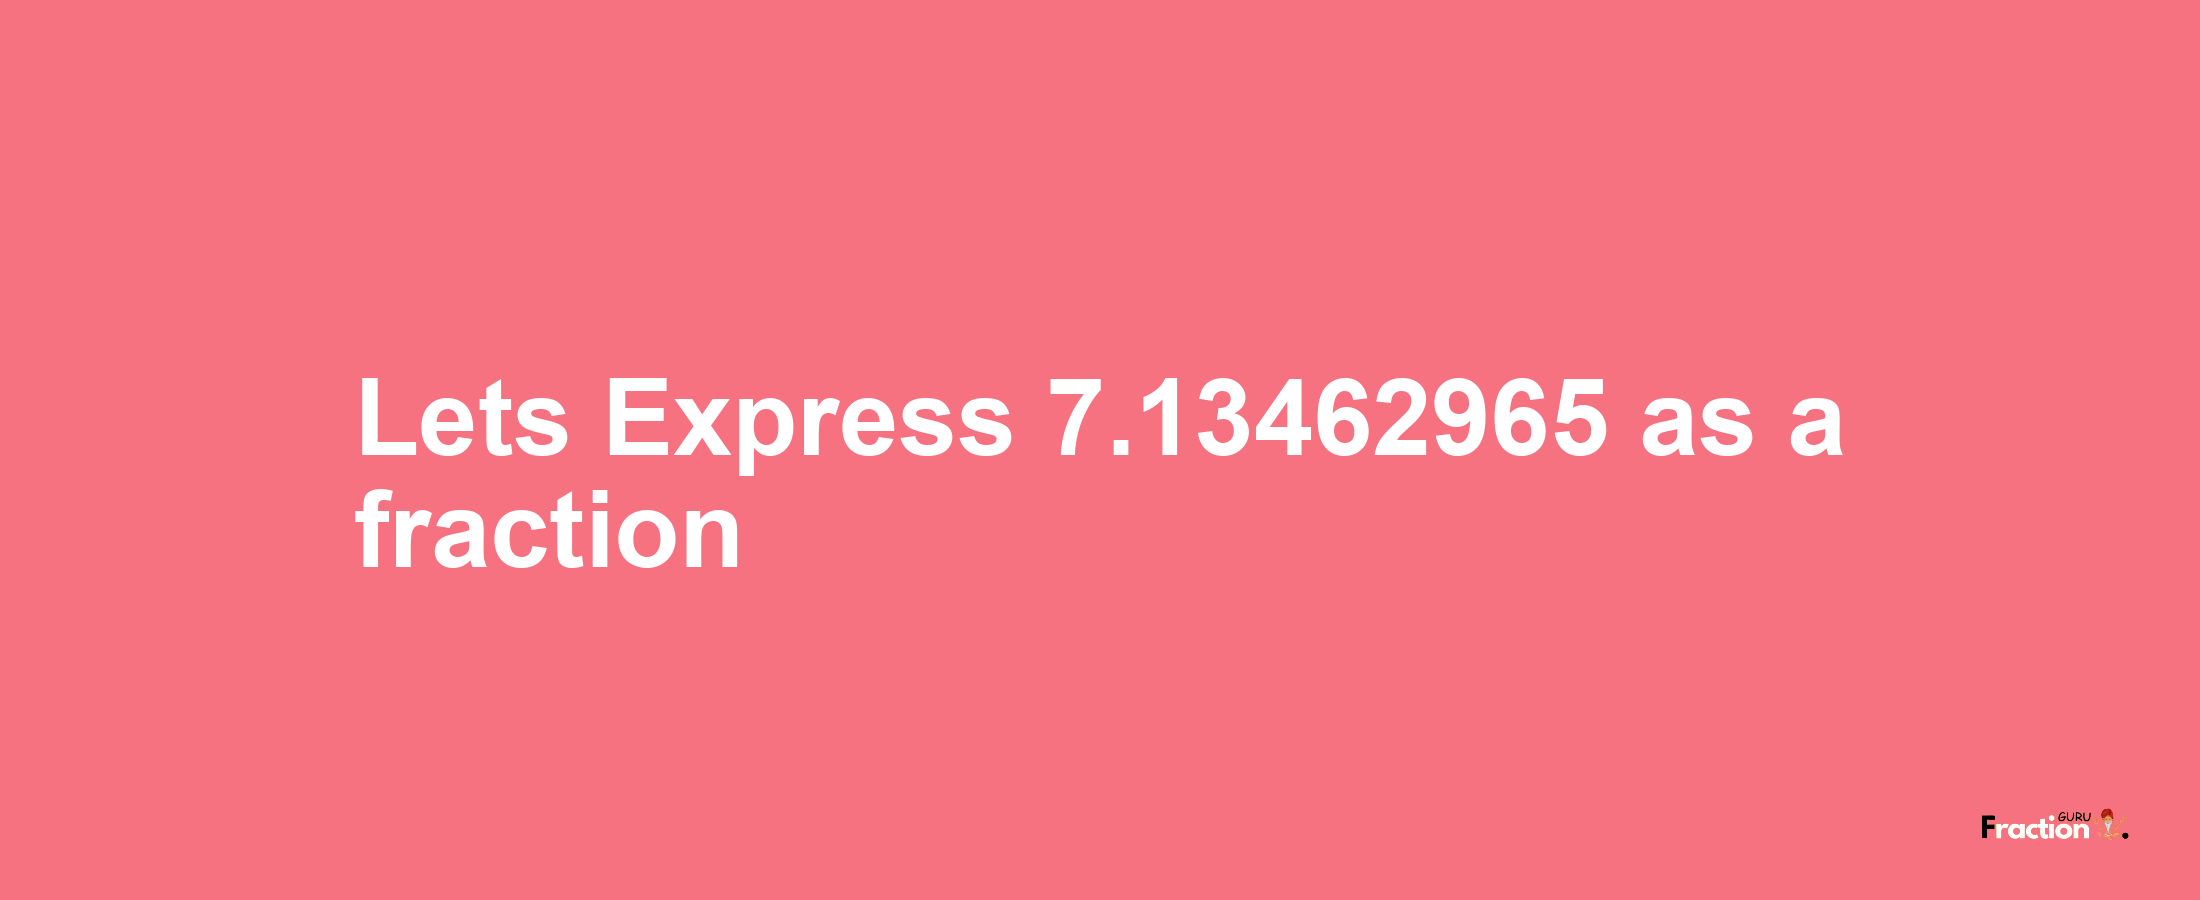 Lets Express 7.13462965 as afraction